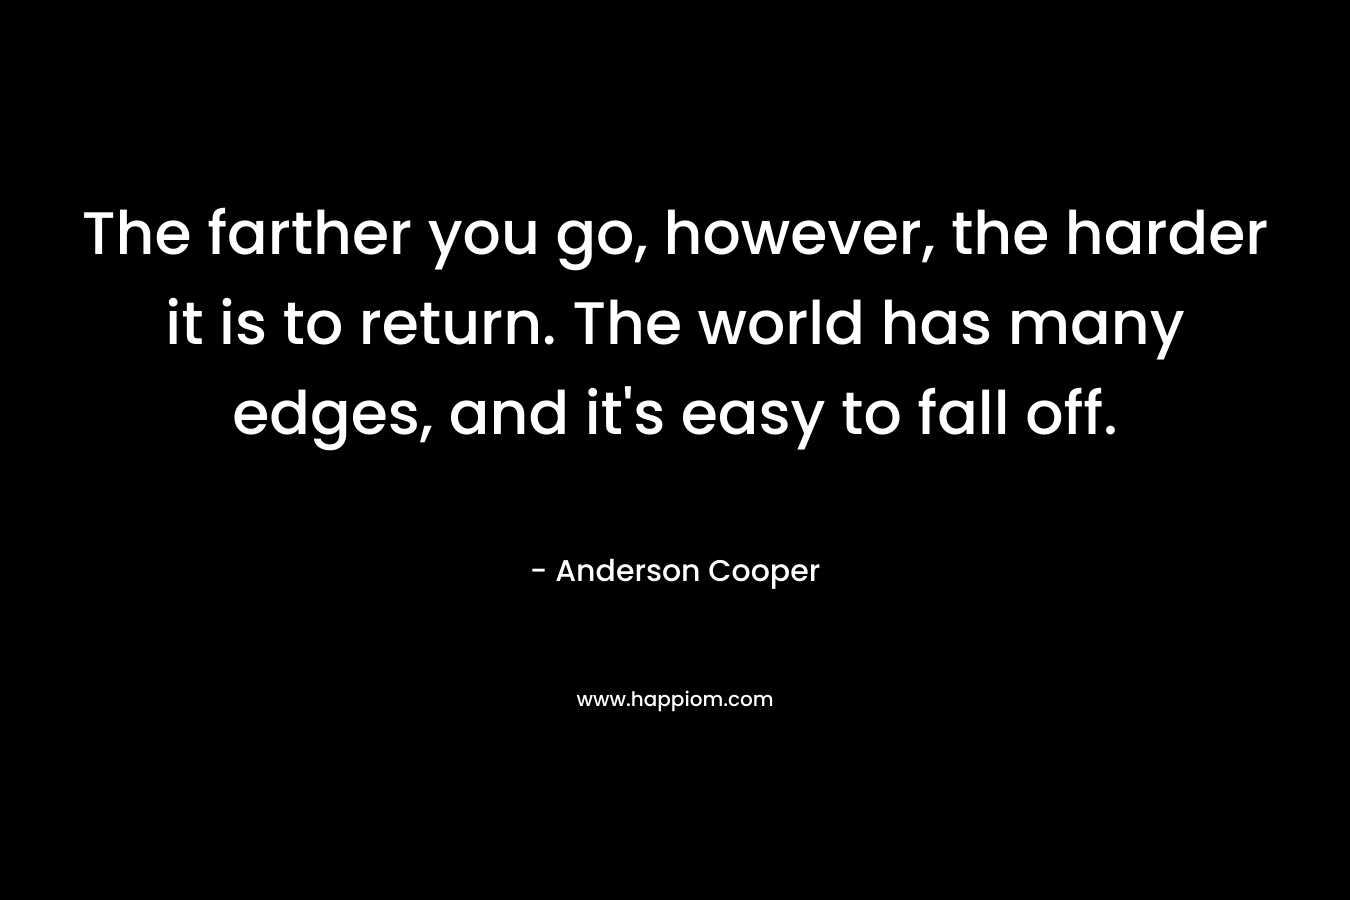 The farther you go, however, the harder it is to return. The world has many edges, and it's easy to fall off.